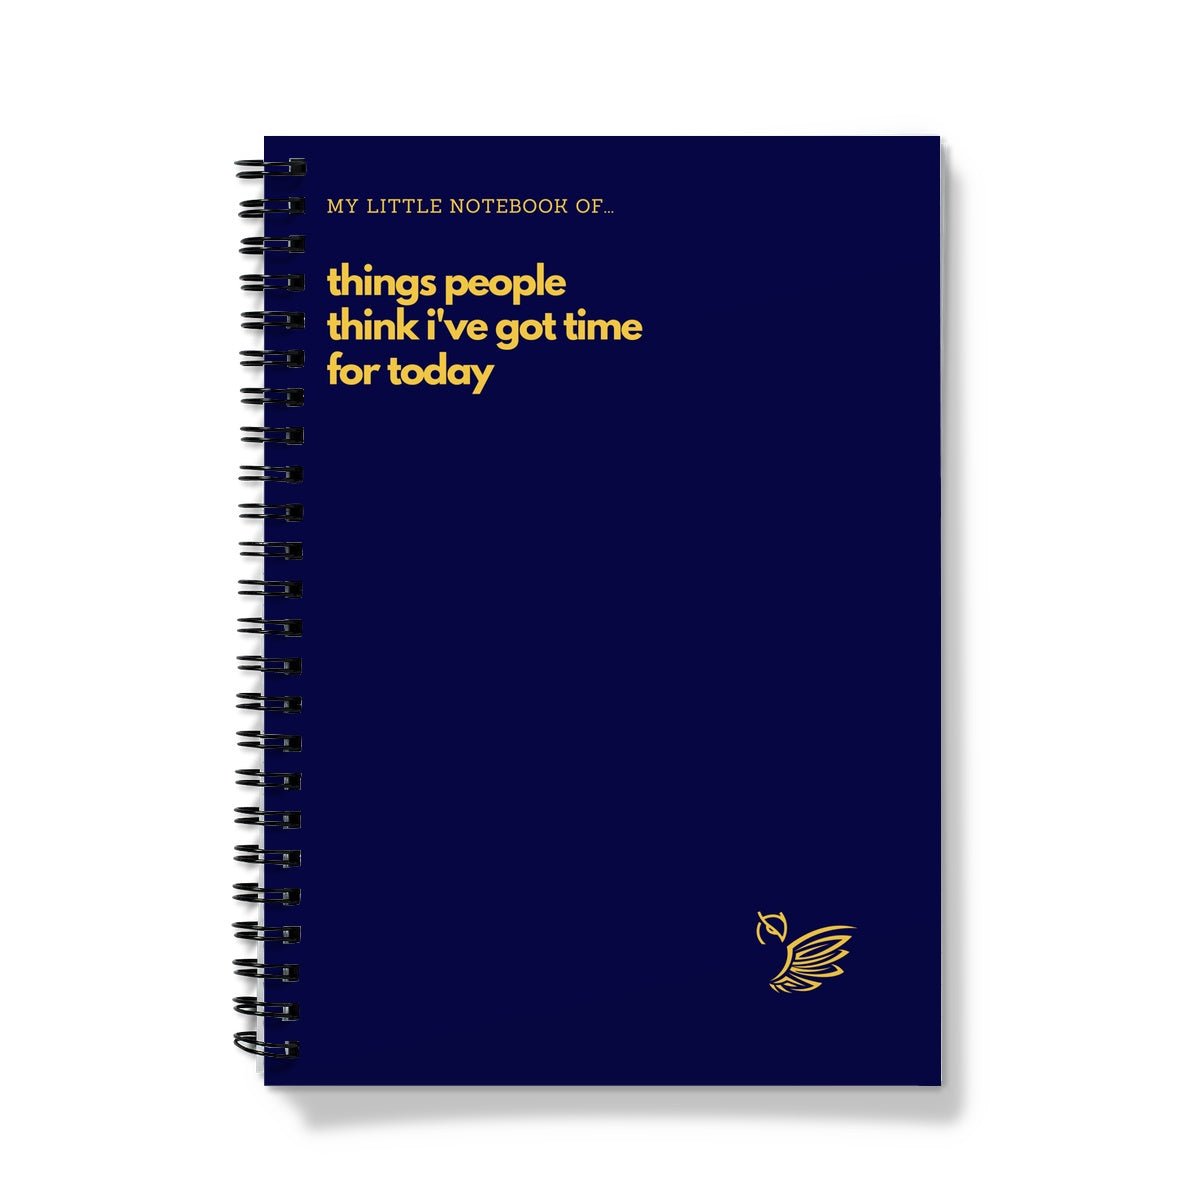 My Little Notebook of... Things People Think I've Got Time For Today Notebook